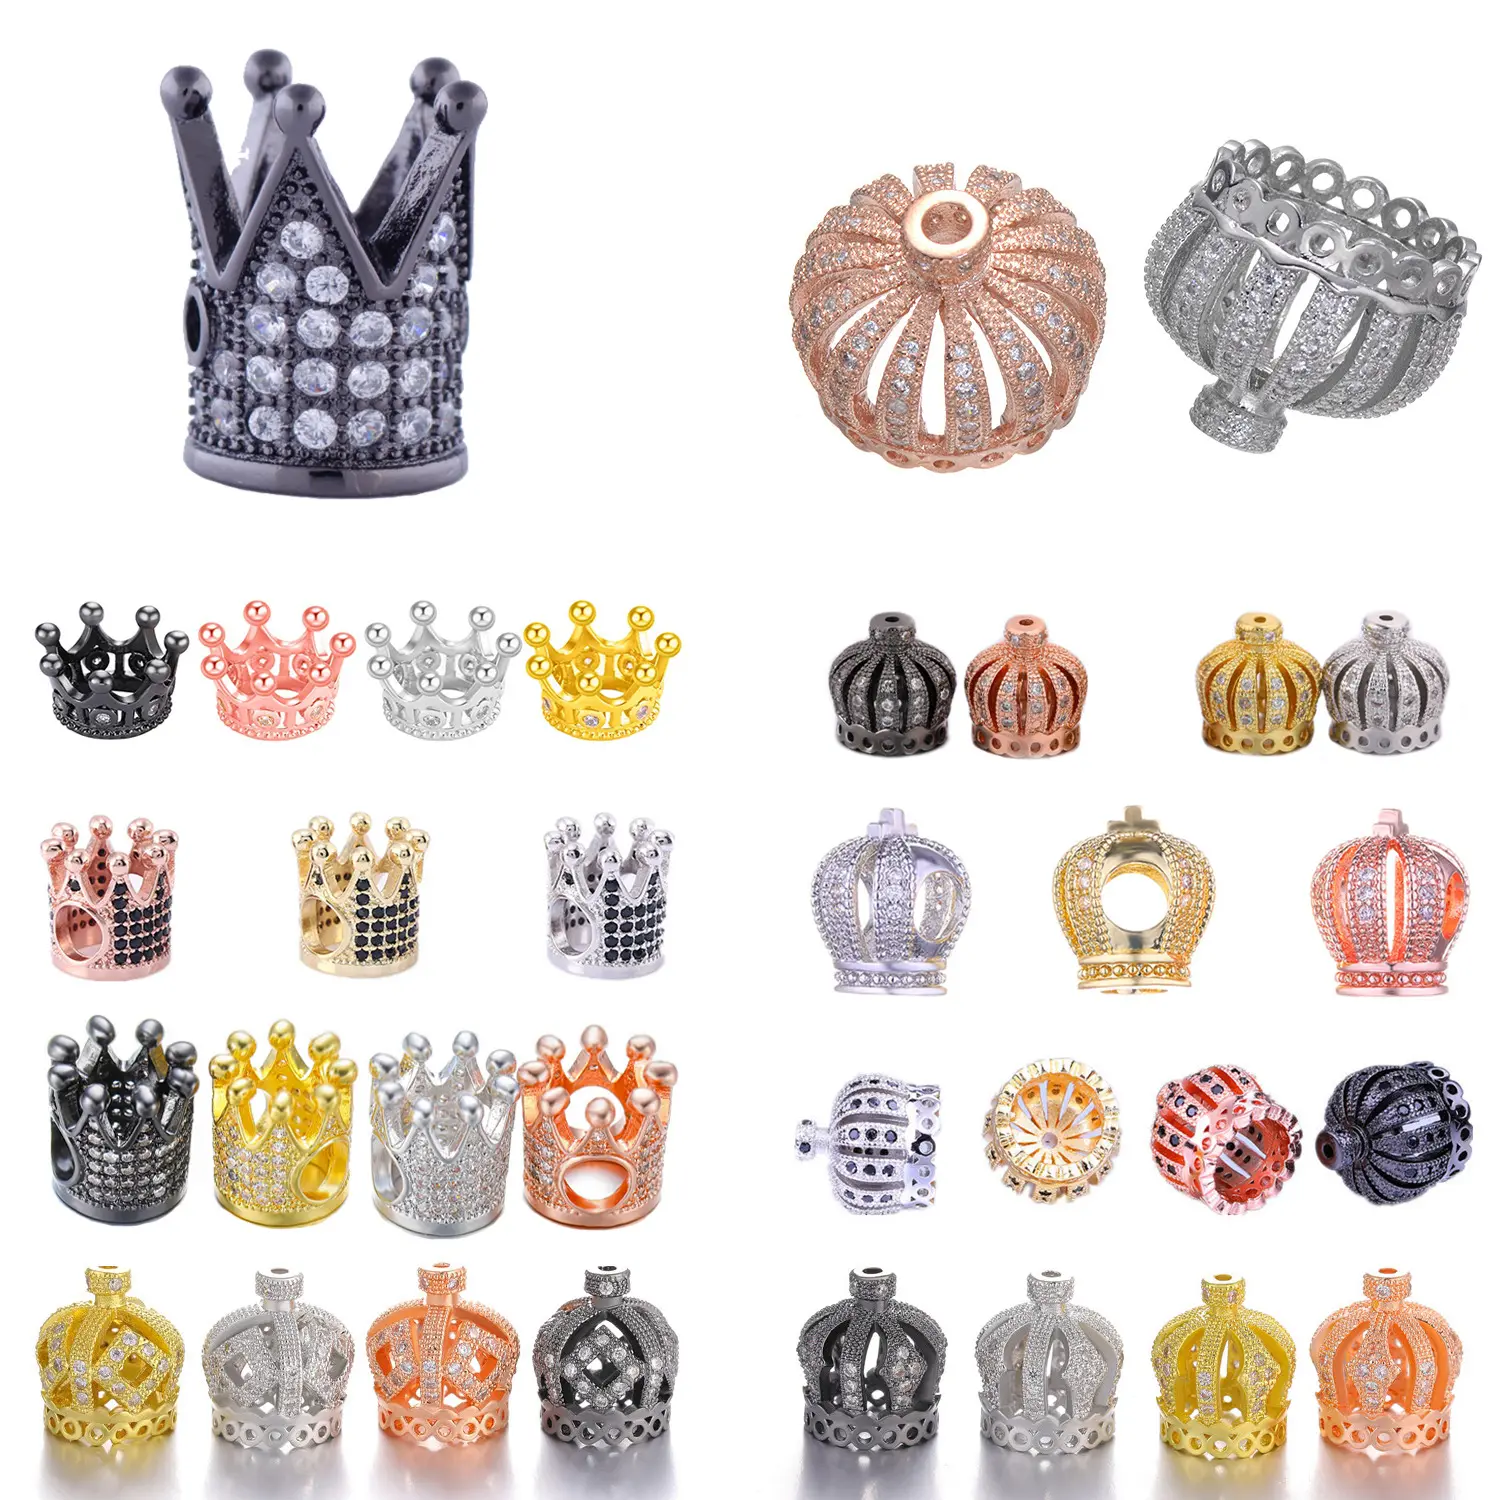 10pcs/lot New Crown Charm Beads fit Bracelet Jewelry Gold/Silver/Black /Rose Gold Crown Beads For DIY Jewelry Making Findings